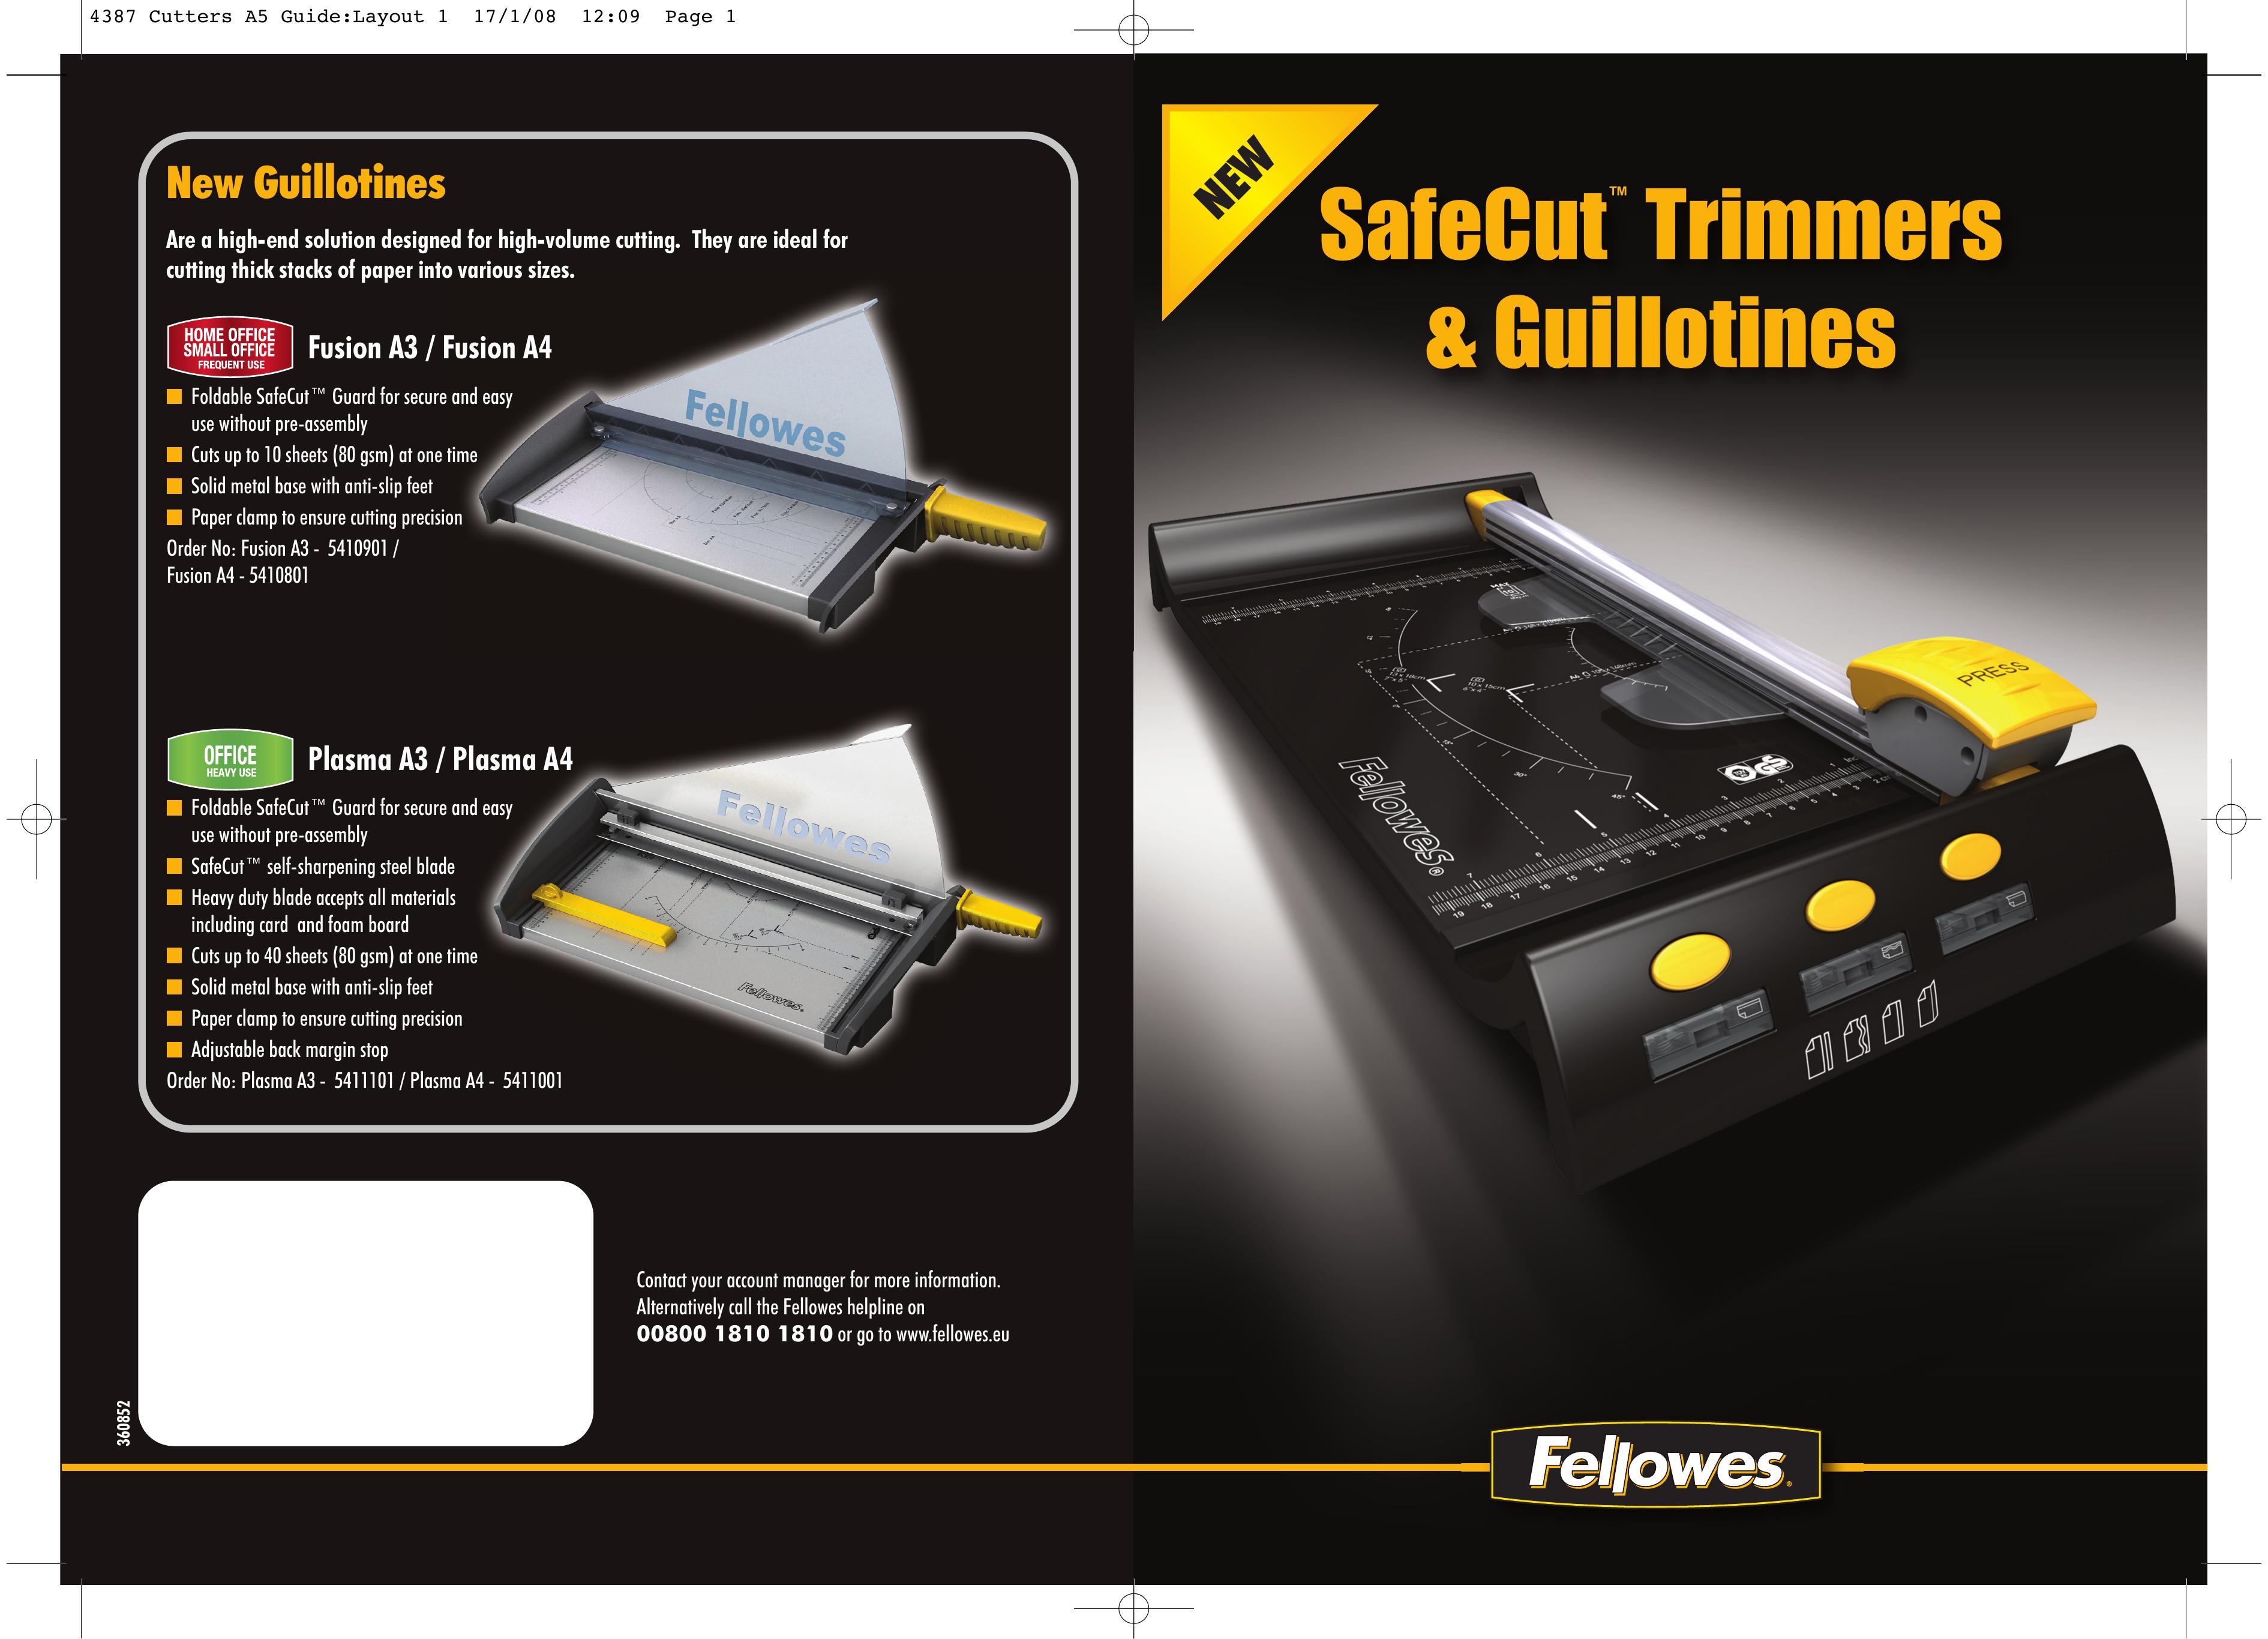 Fellowes A3 - 5410901 Trimmer User Manual